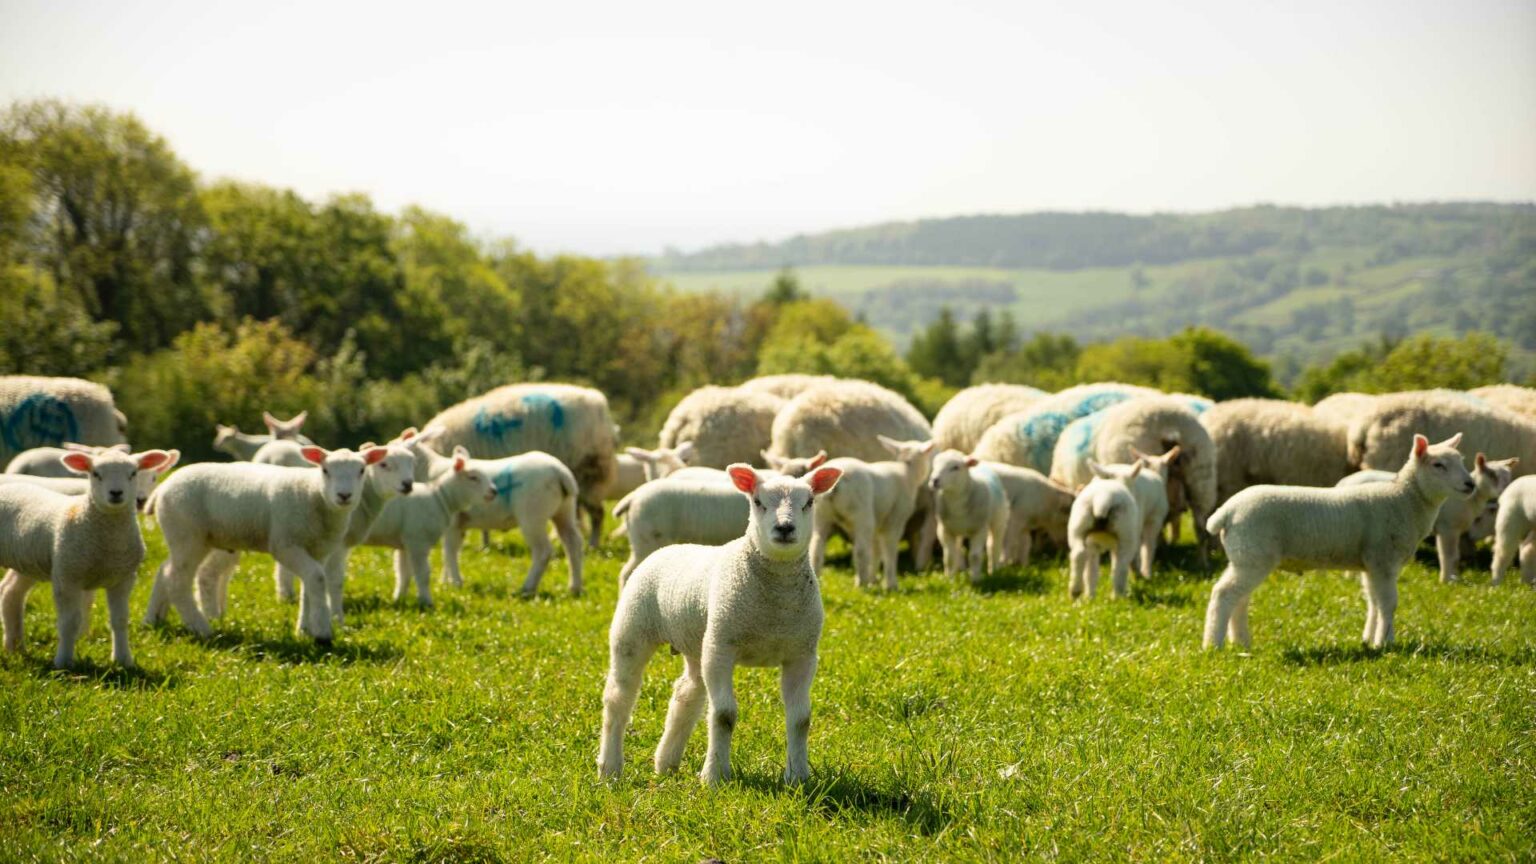 Lambing Spectam Shortage: Spectam Scour Halt (produced by Ceva Animal Health) is currently experiencing availability issues.